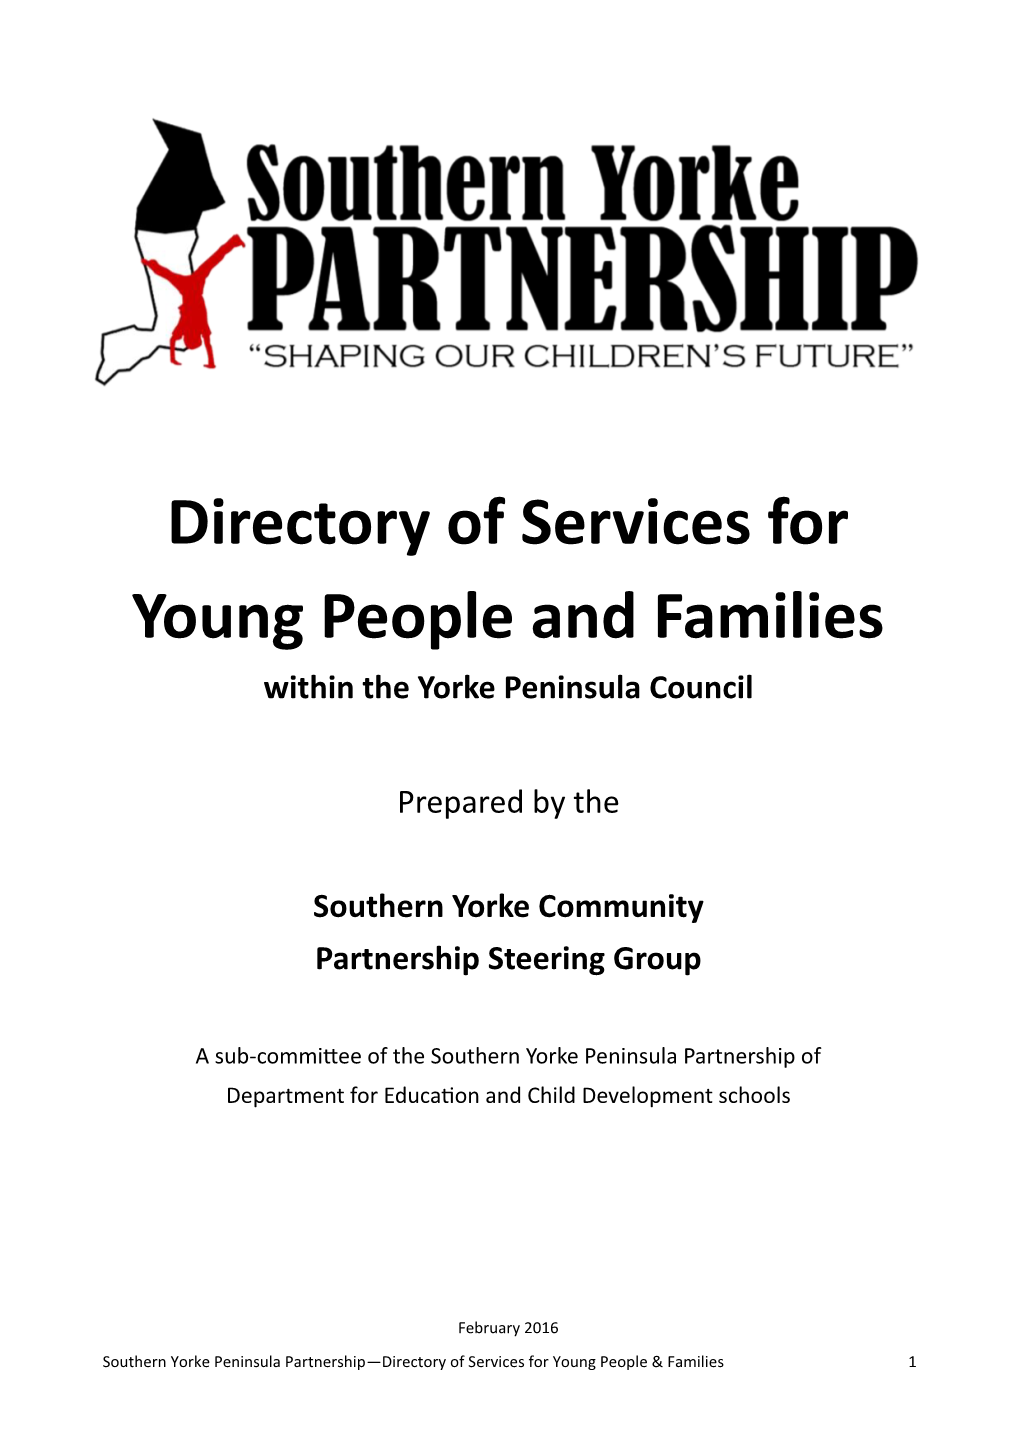 Directory of Services for Young People and Families Within the Yorke Peninsula Council